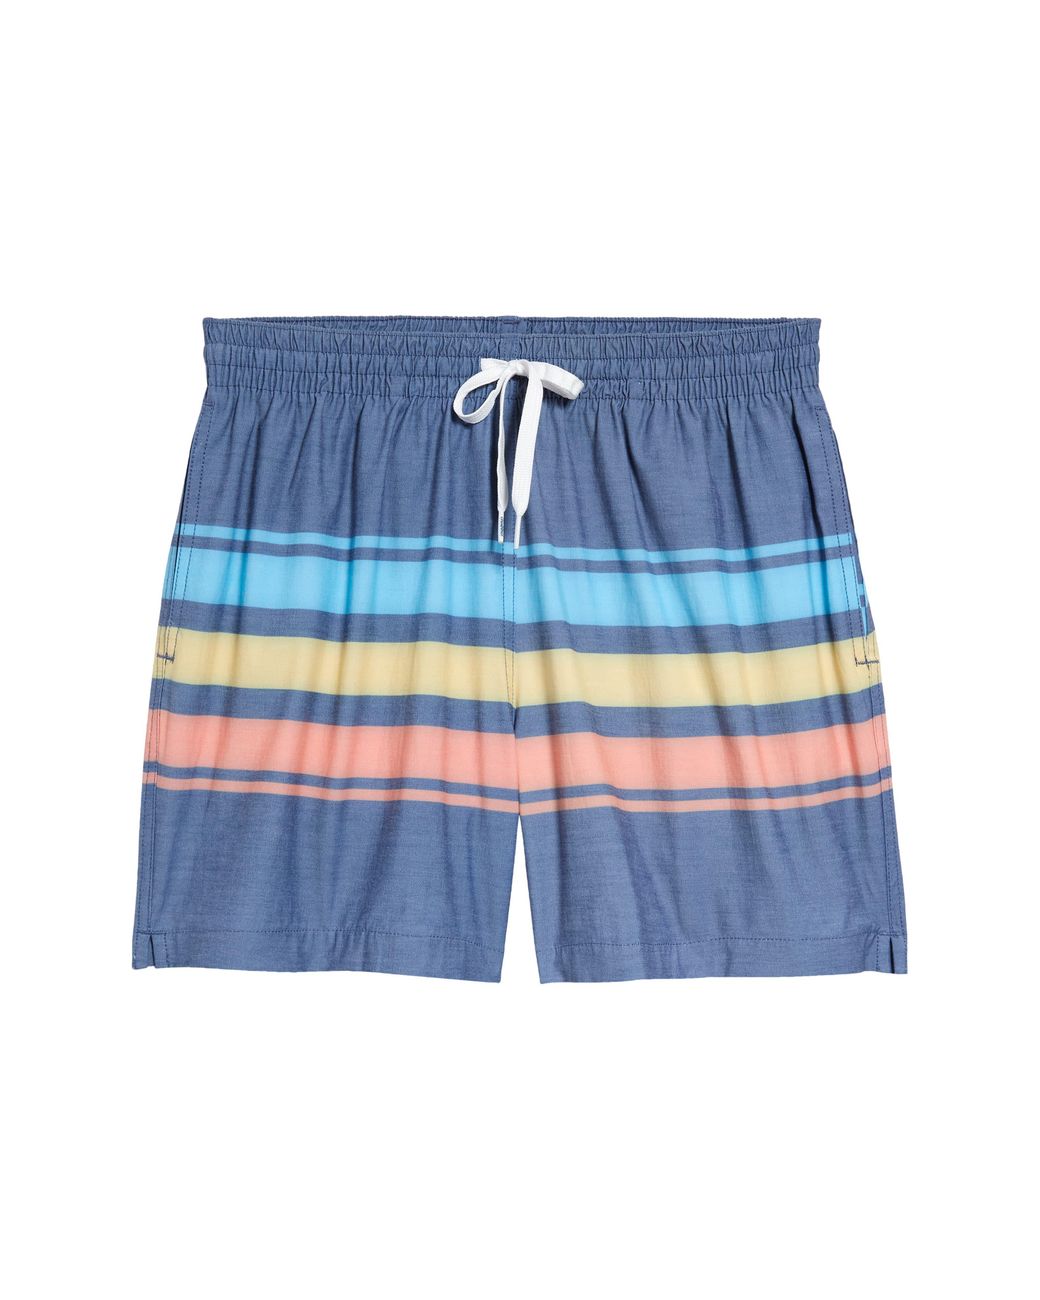 Chubbies 5.5-inch Swim Trunks In The Retro Sets At Nordstrom Rack in ...